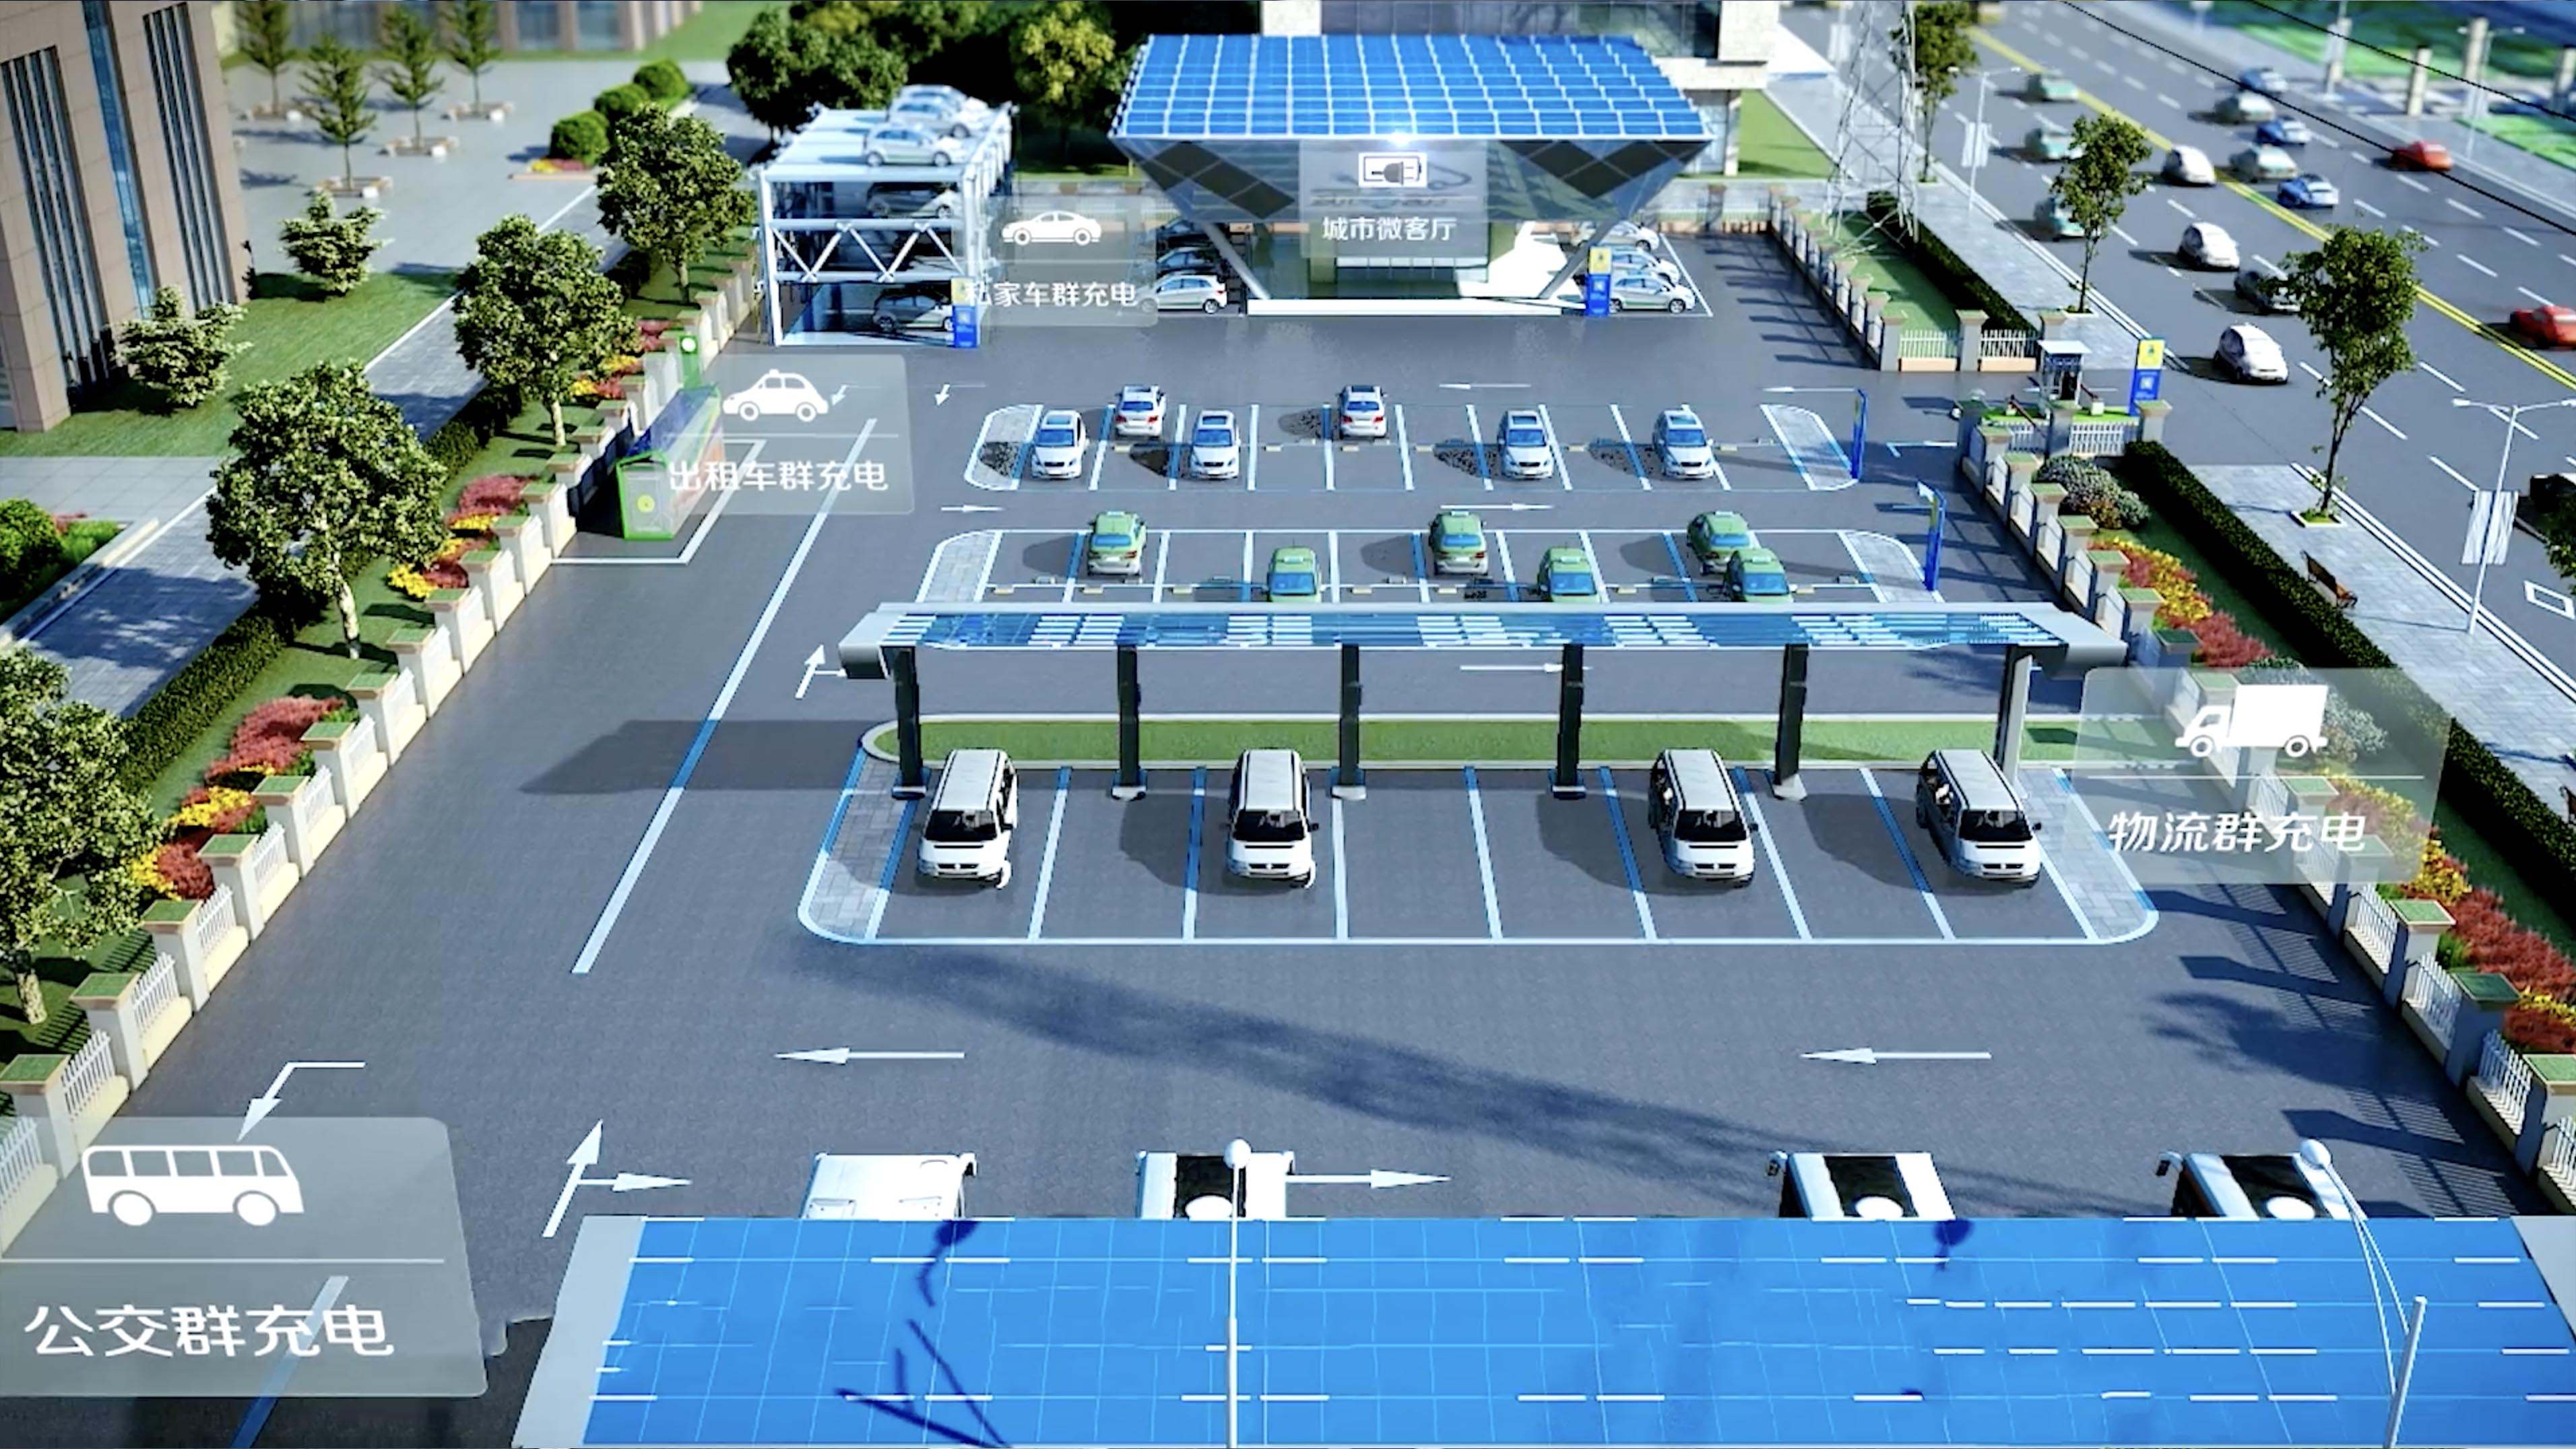 EV charging stations blazing new trail in green energy in China CGTN